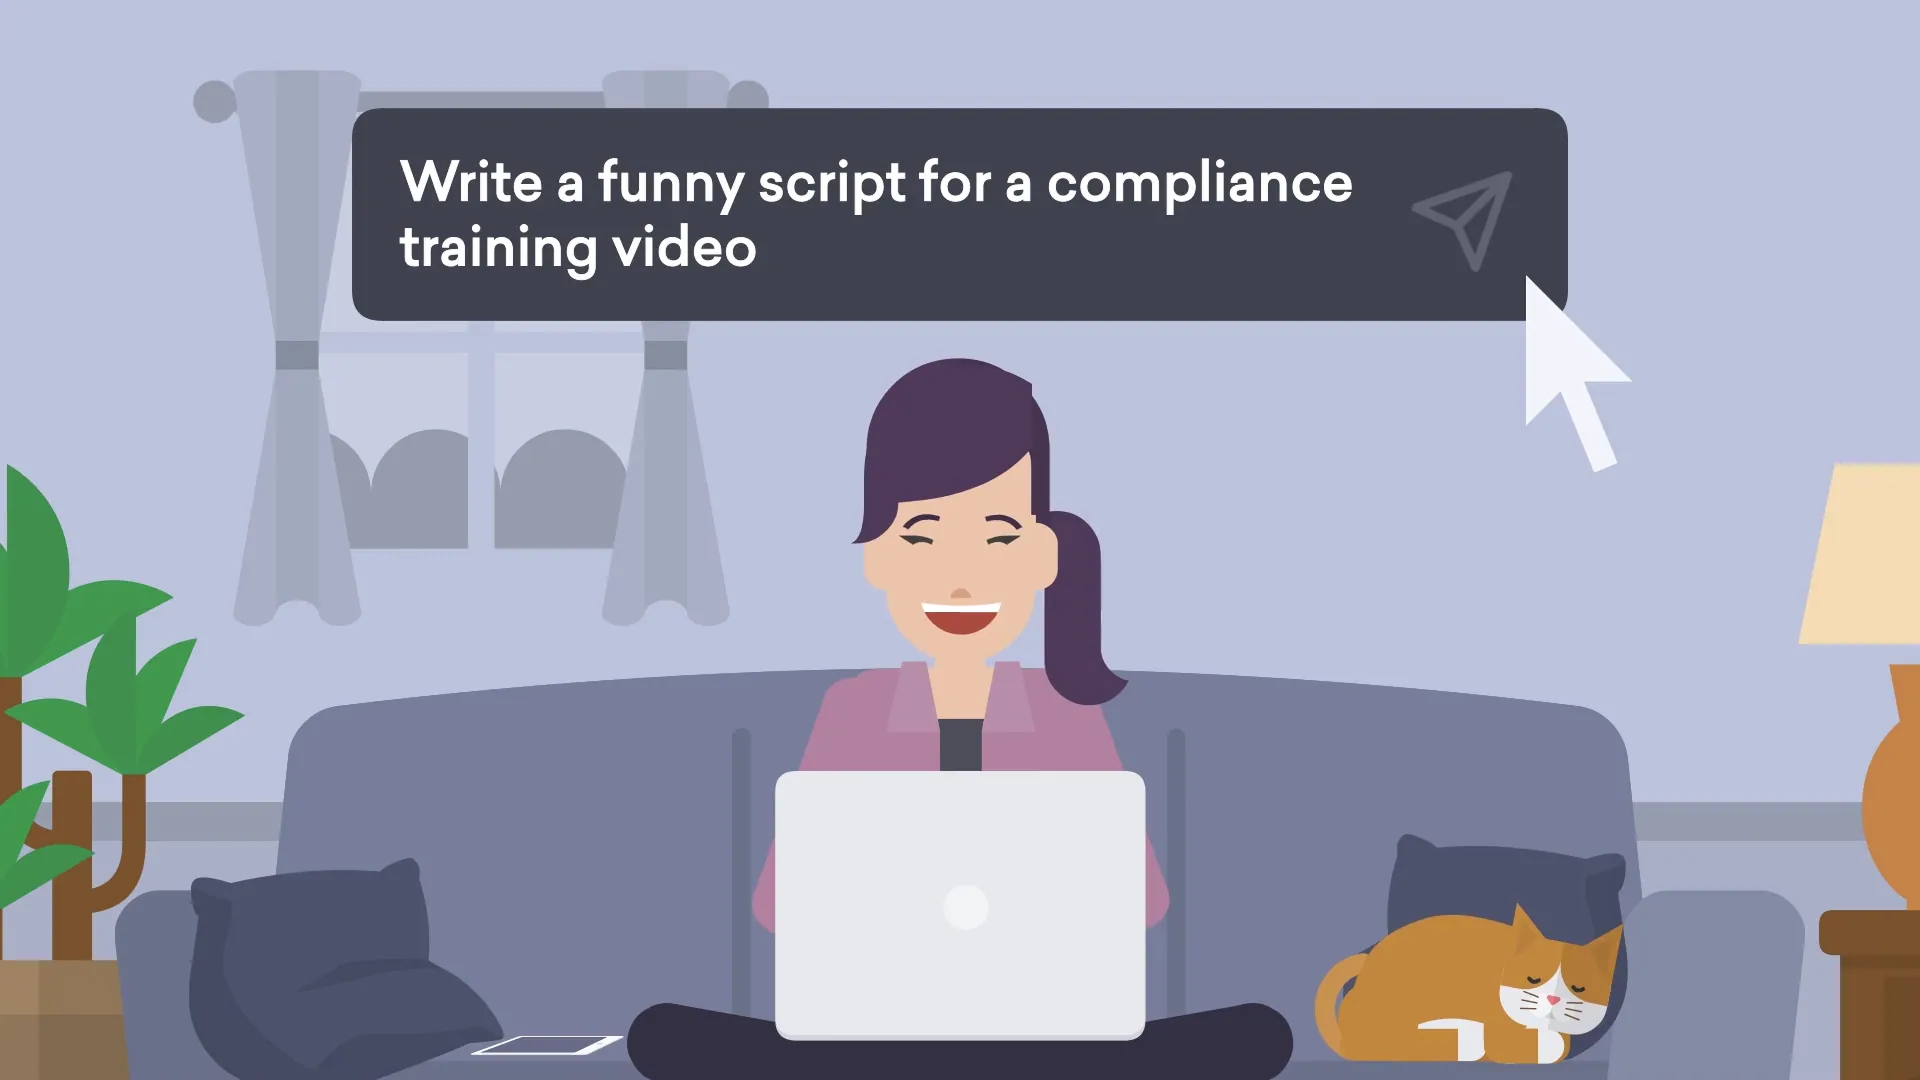 The image is part of Vyond's resource post "The Ultimate Guide to AI-Powered Video". The iamge showcases a person working on their computer and with a speech bubble that reads "Write a funny script for a compliance training video"